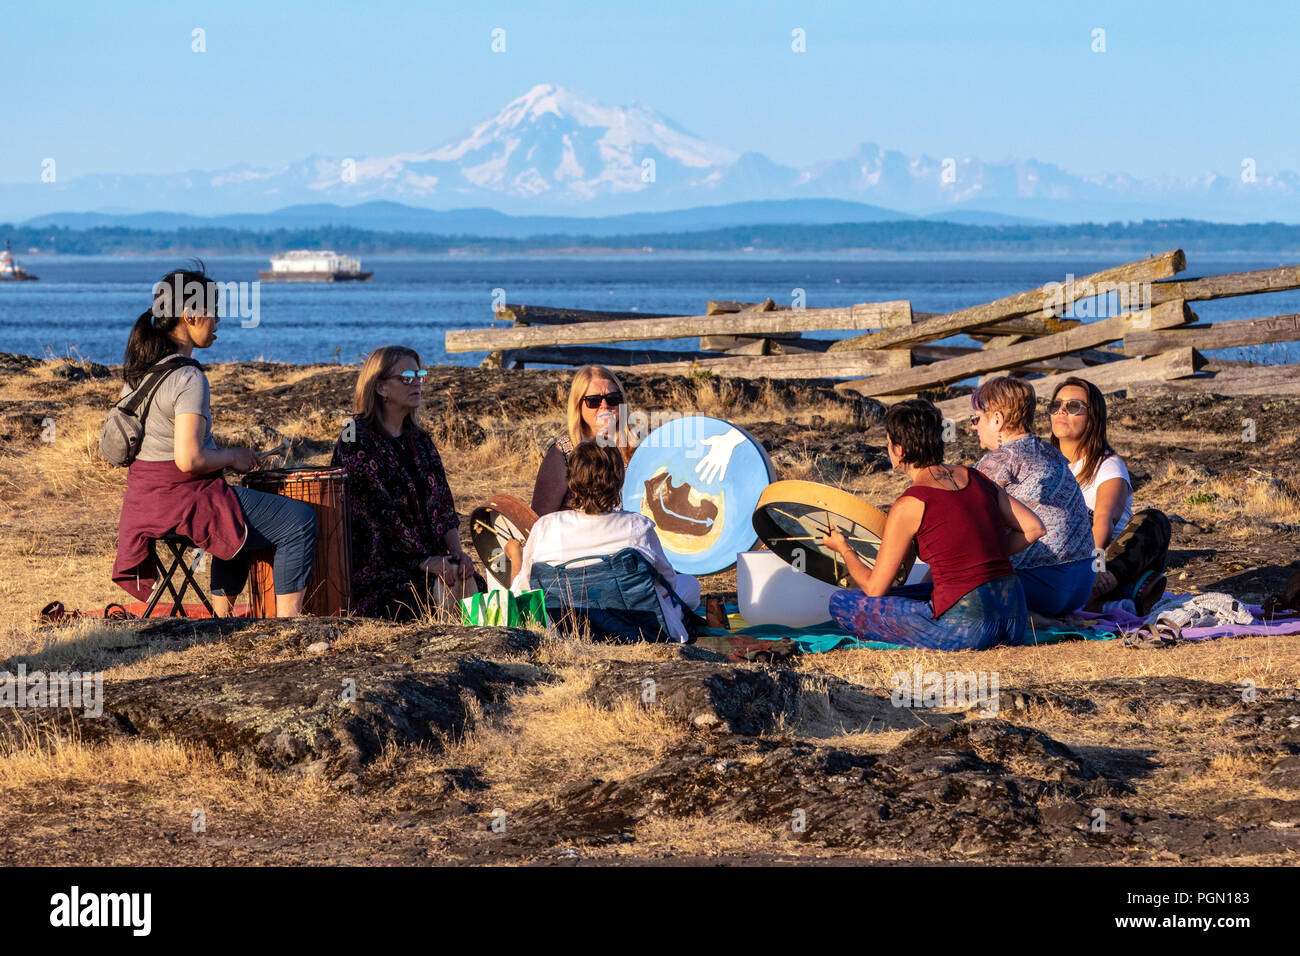 Drum circle at Cattle Point in Uplands Park, Oak Bay near Victoria, Vancouver Island, British Columbia, Canada Stock Photo